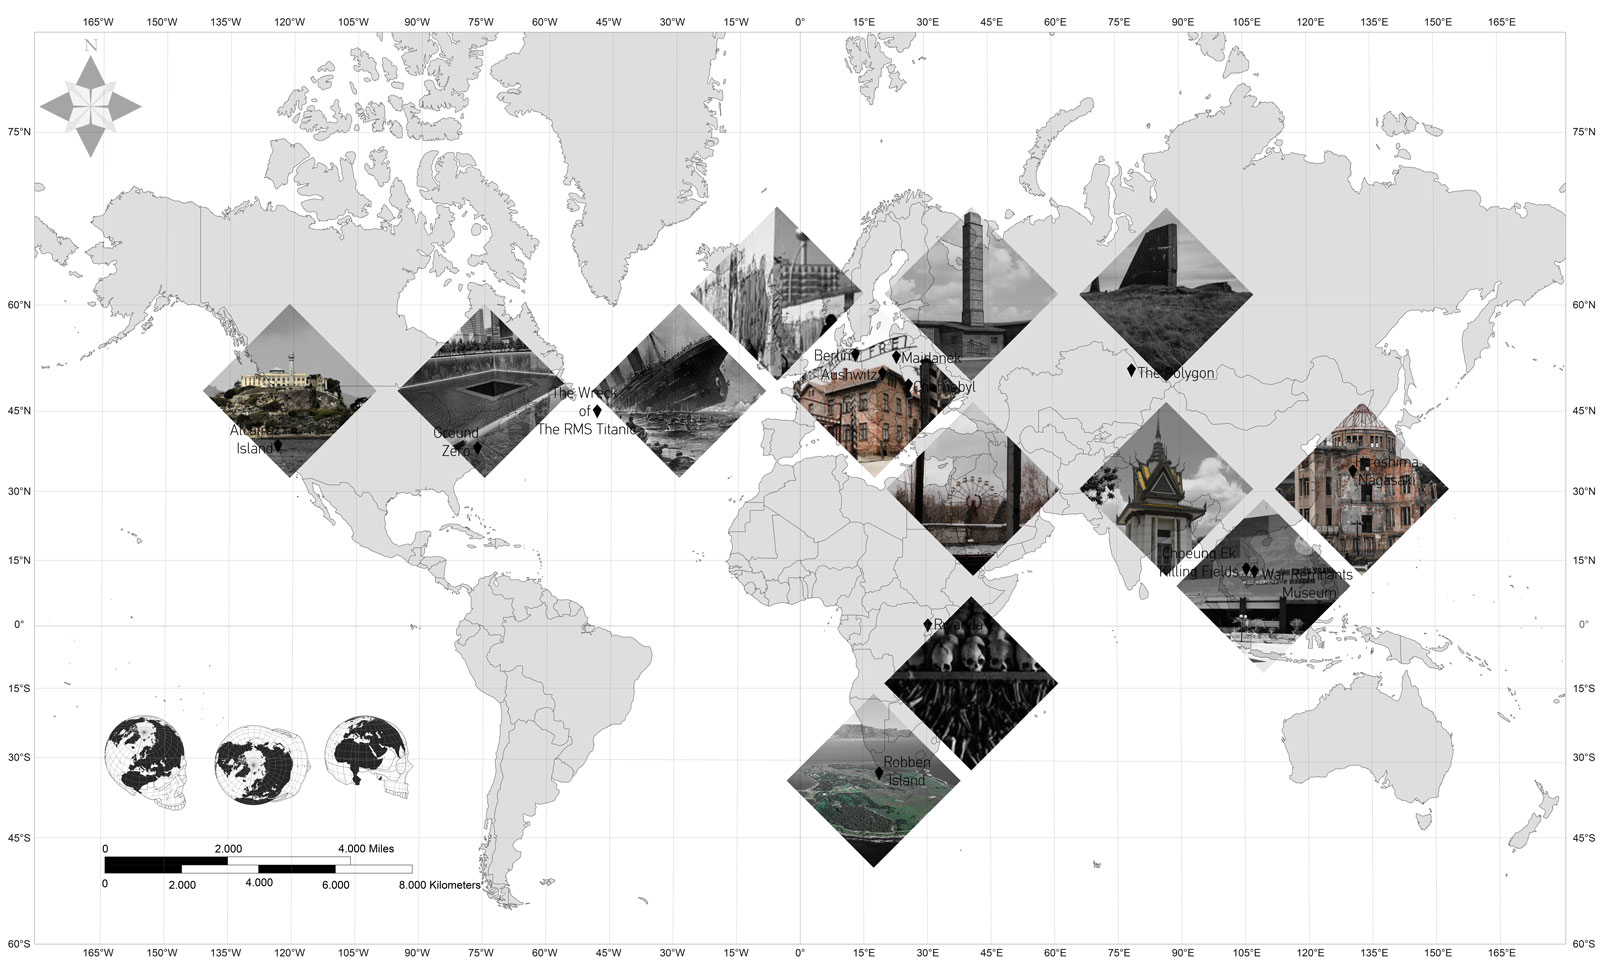 Archisearch Dark Tourism: Mapping the world behind the shadow | Research thesis by Michail Karamichalis